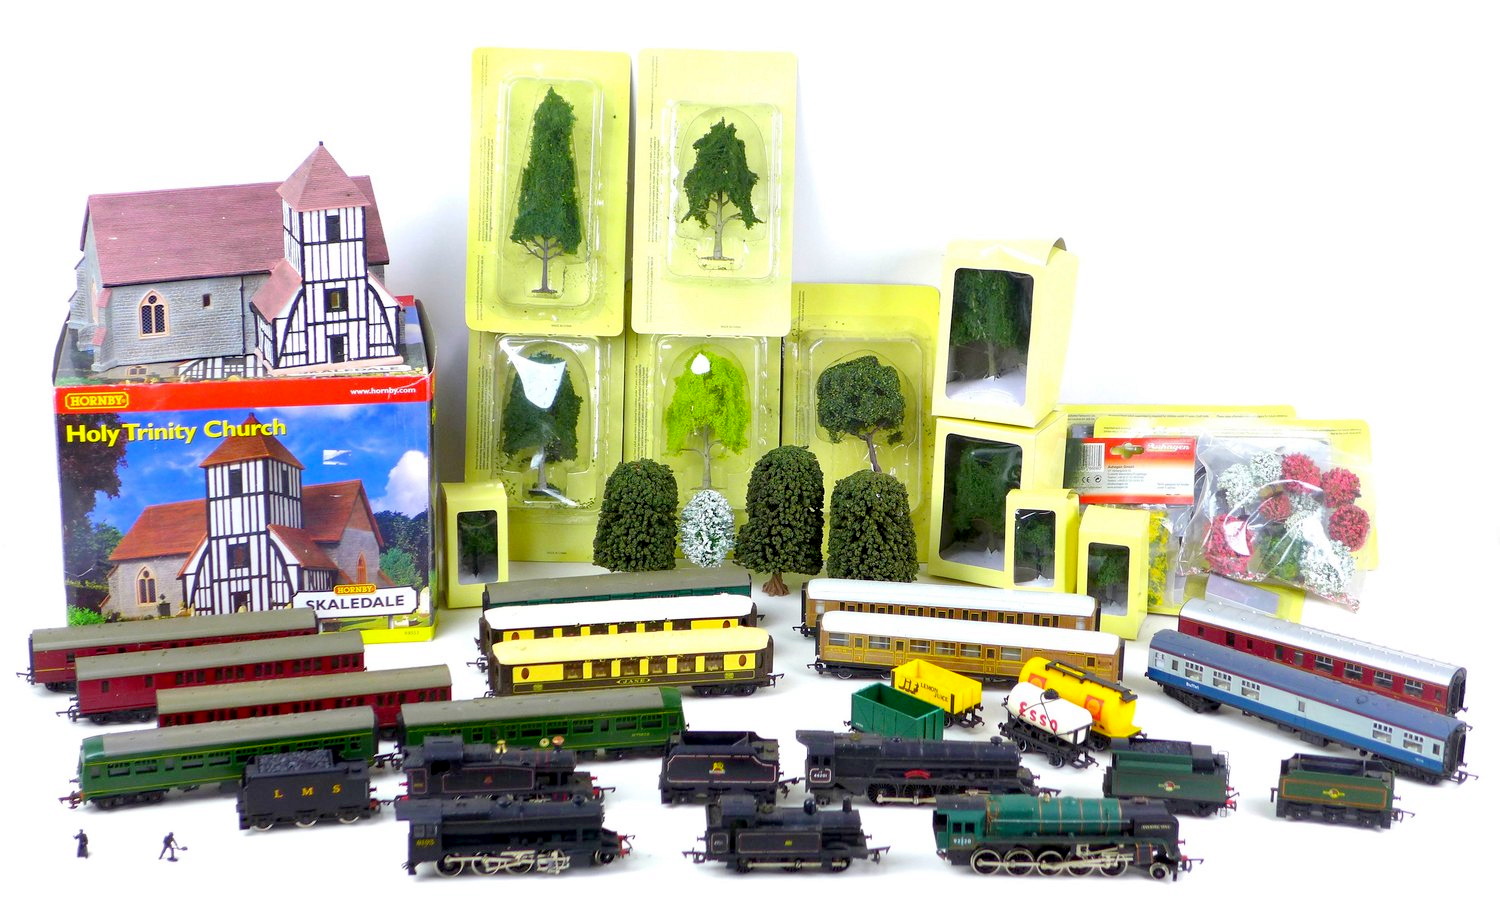 A collection of Hornby OO gauge railway models, including four locomotives, 2-10-0 Evening Star